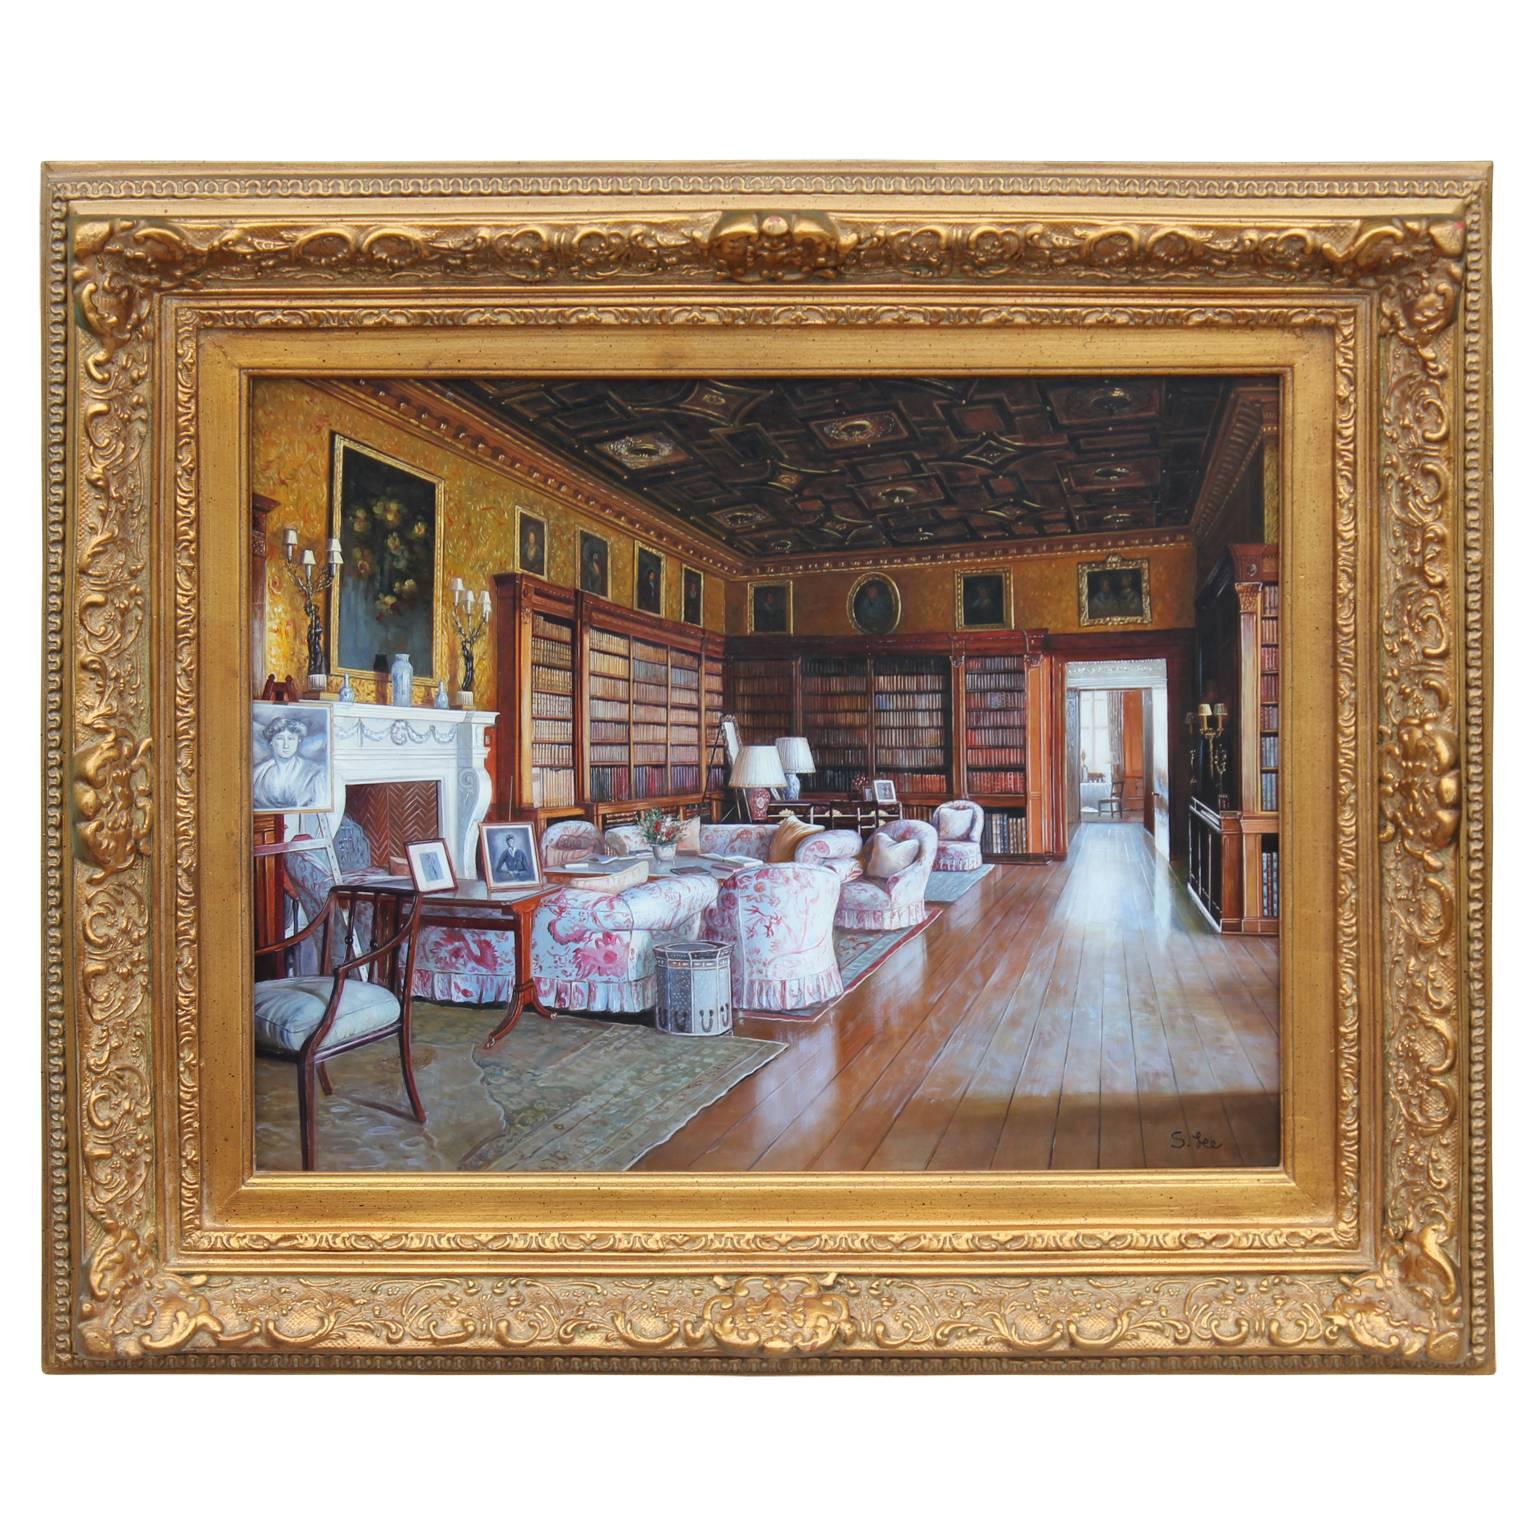 Unknown Interior Painting - Mansion Interior Architectural Paintings 